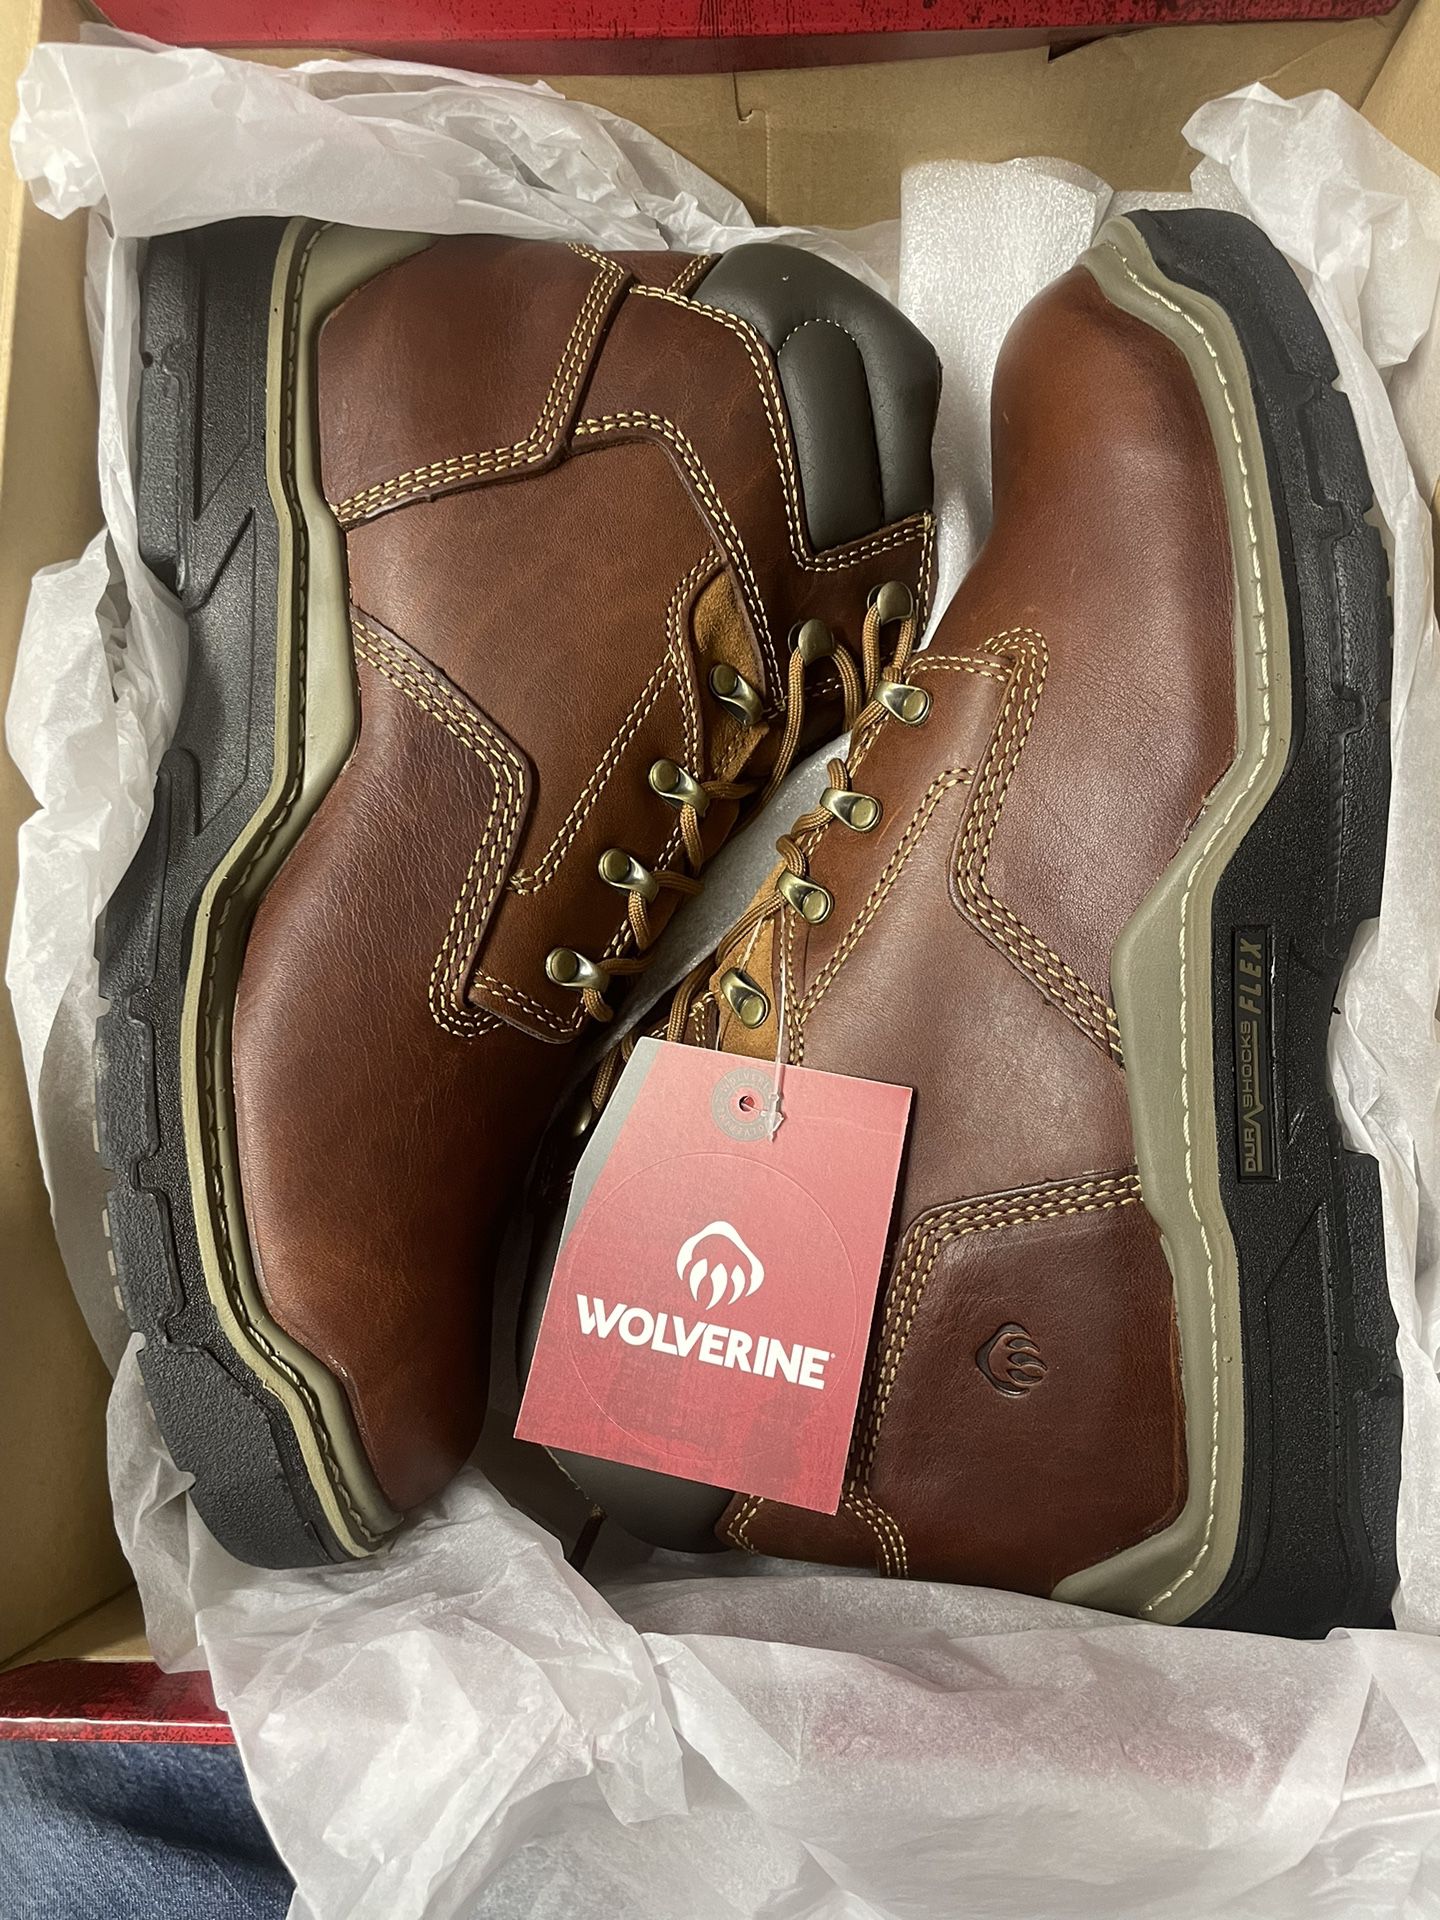 Wolverine Soft Toe Work Boots Size 11.5